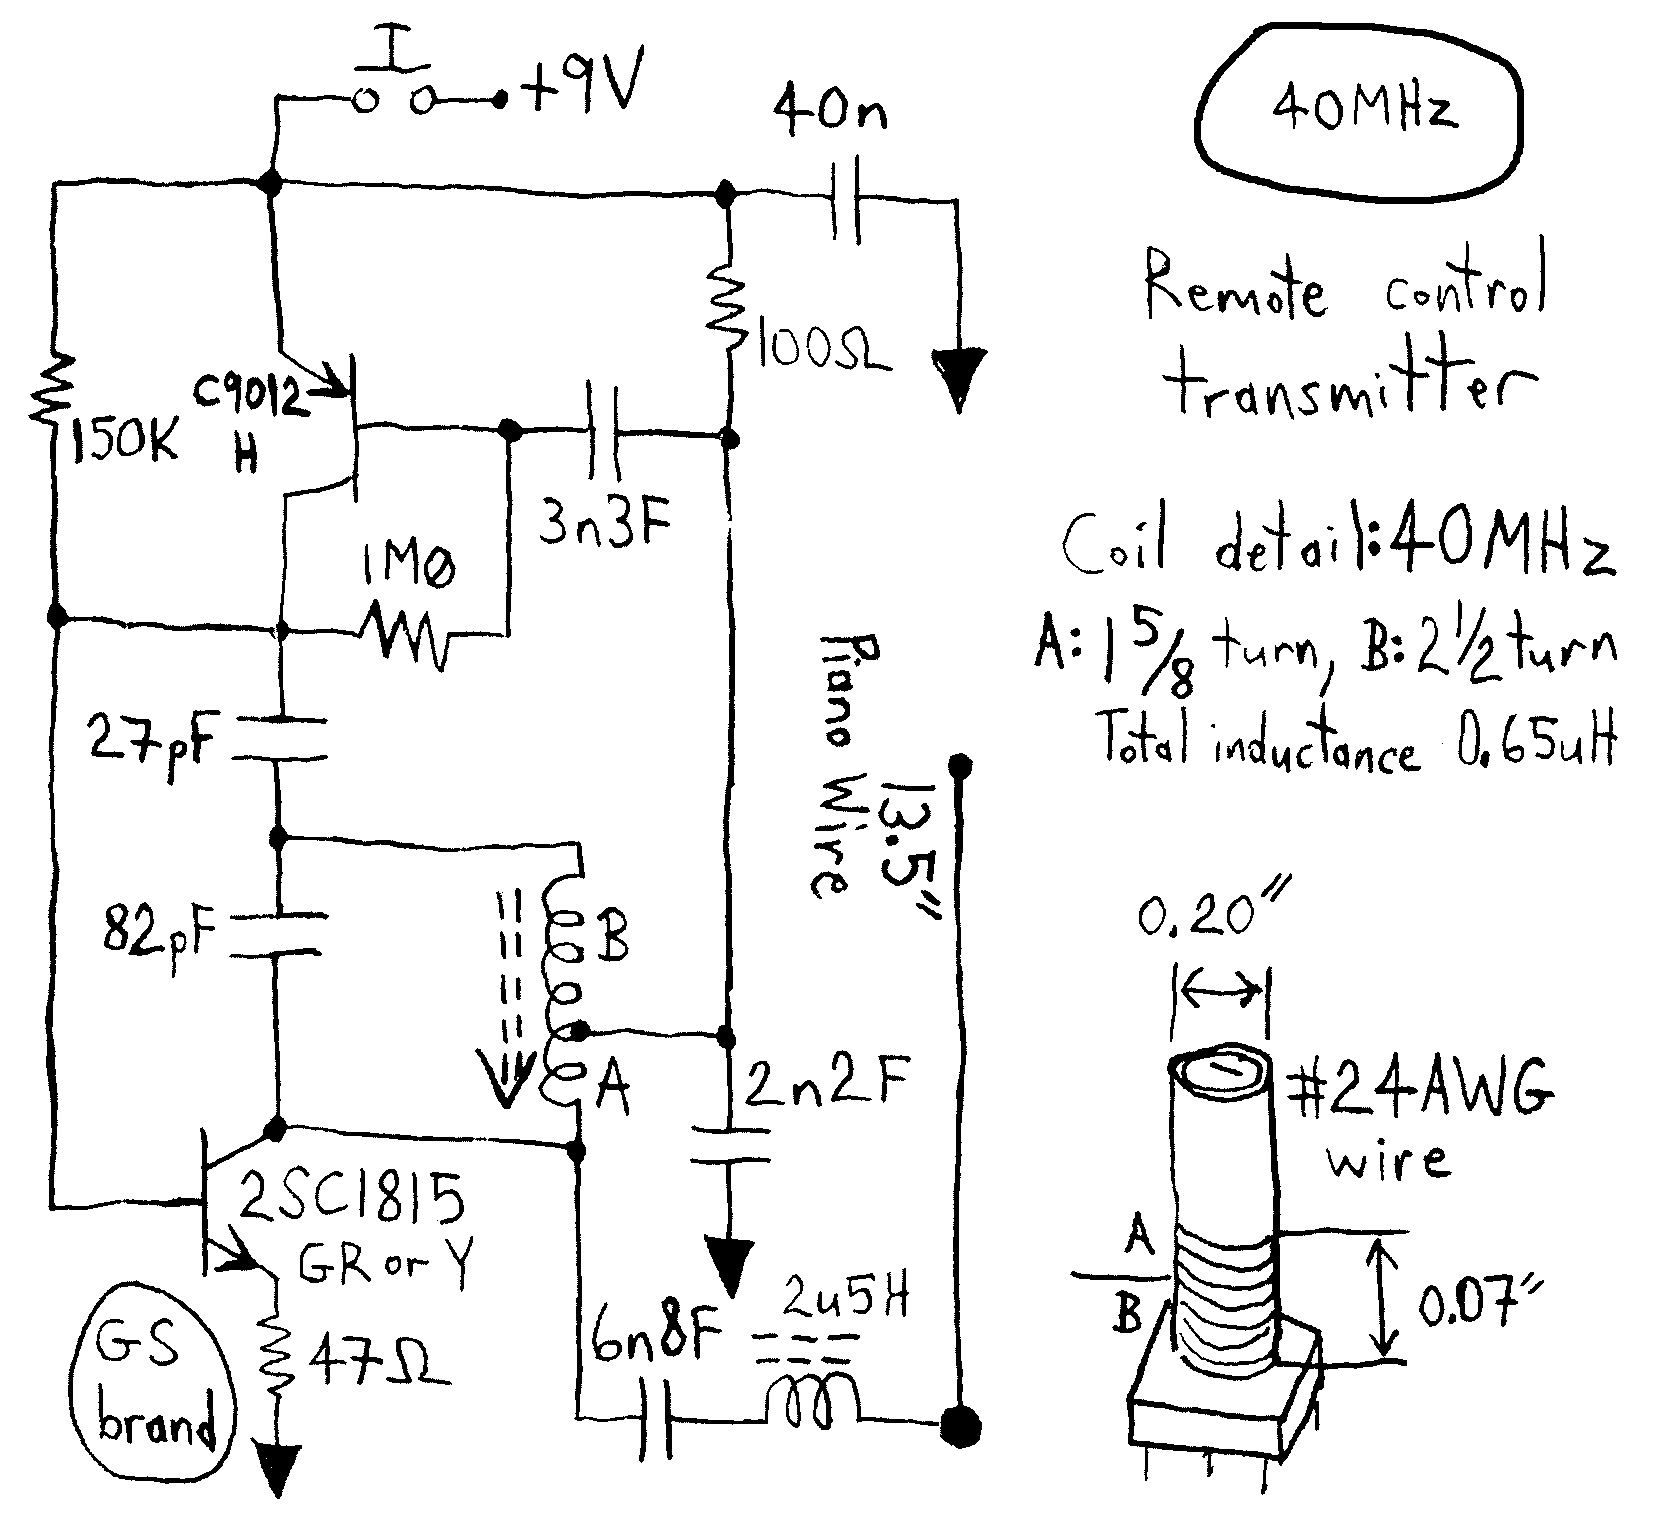 Simple RC Cars - Single channel Transmitters and Super Regenerative Receivers at 27 MHz and 49 MHz